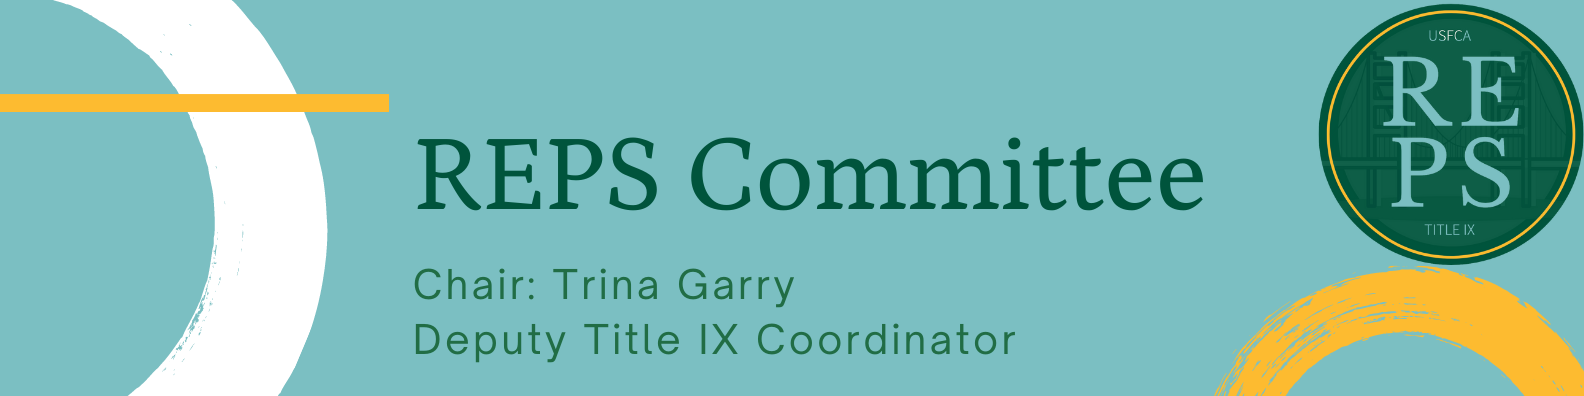 REPS Committee Chaired by Trina Garry Deputy Title IX Coordinator 